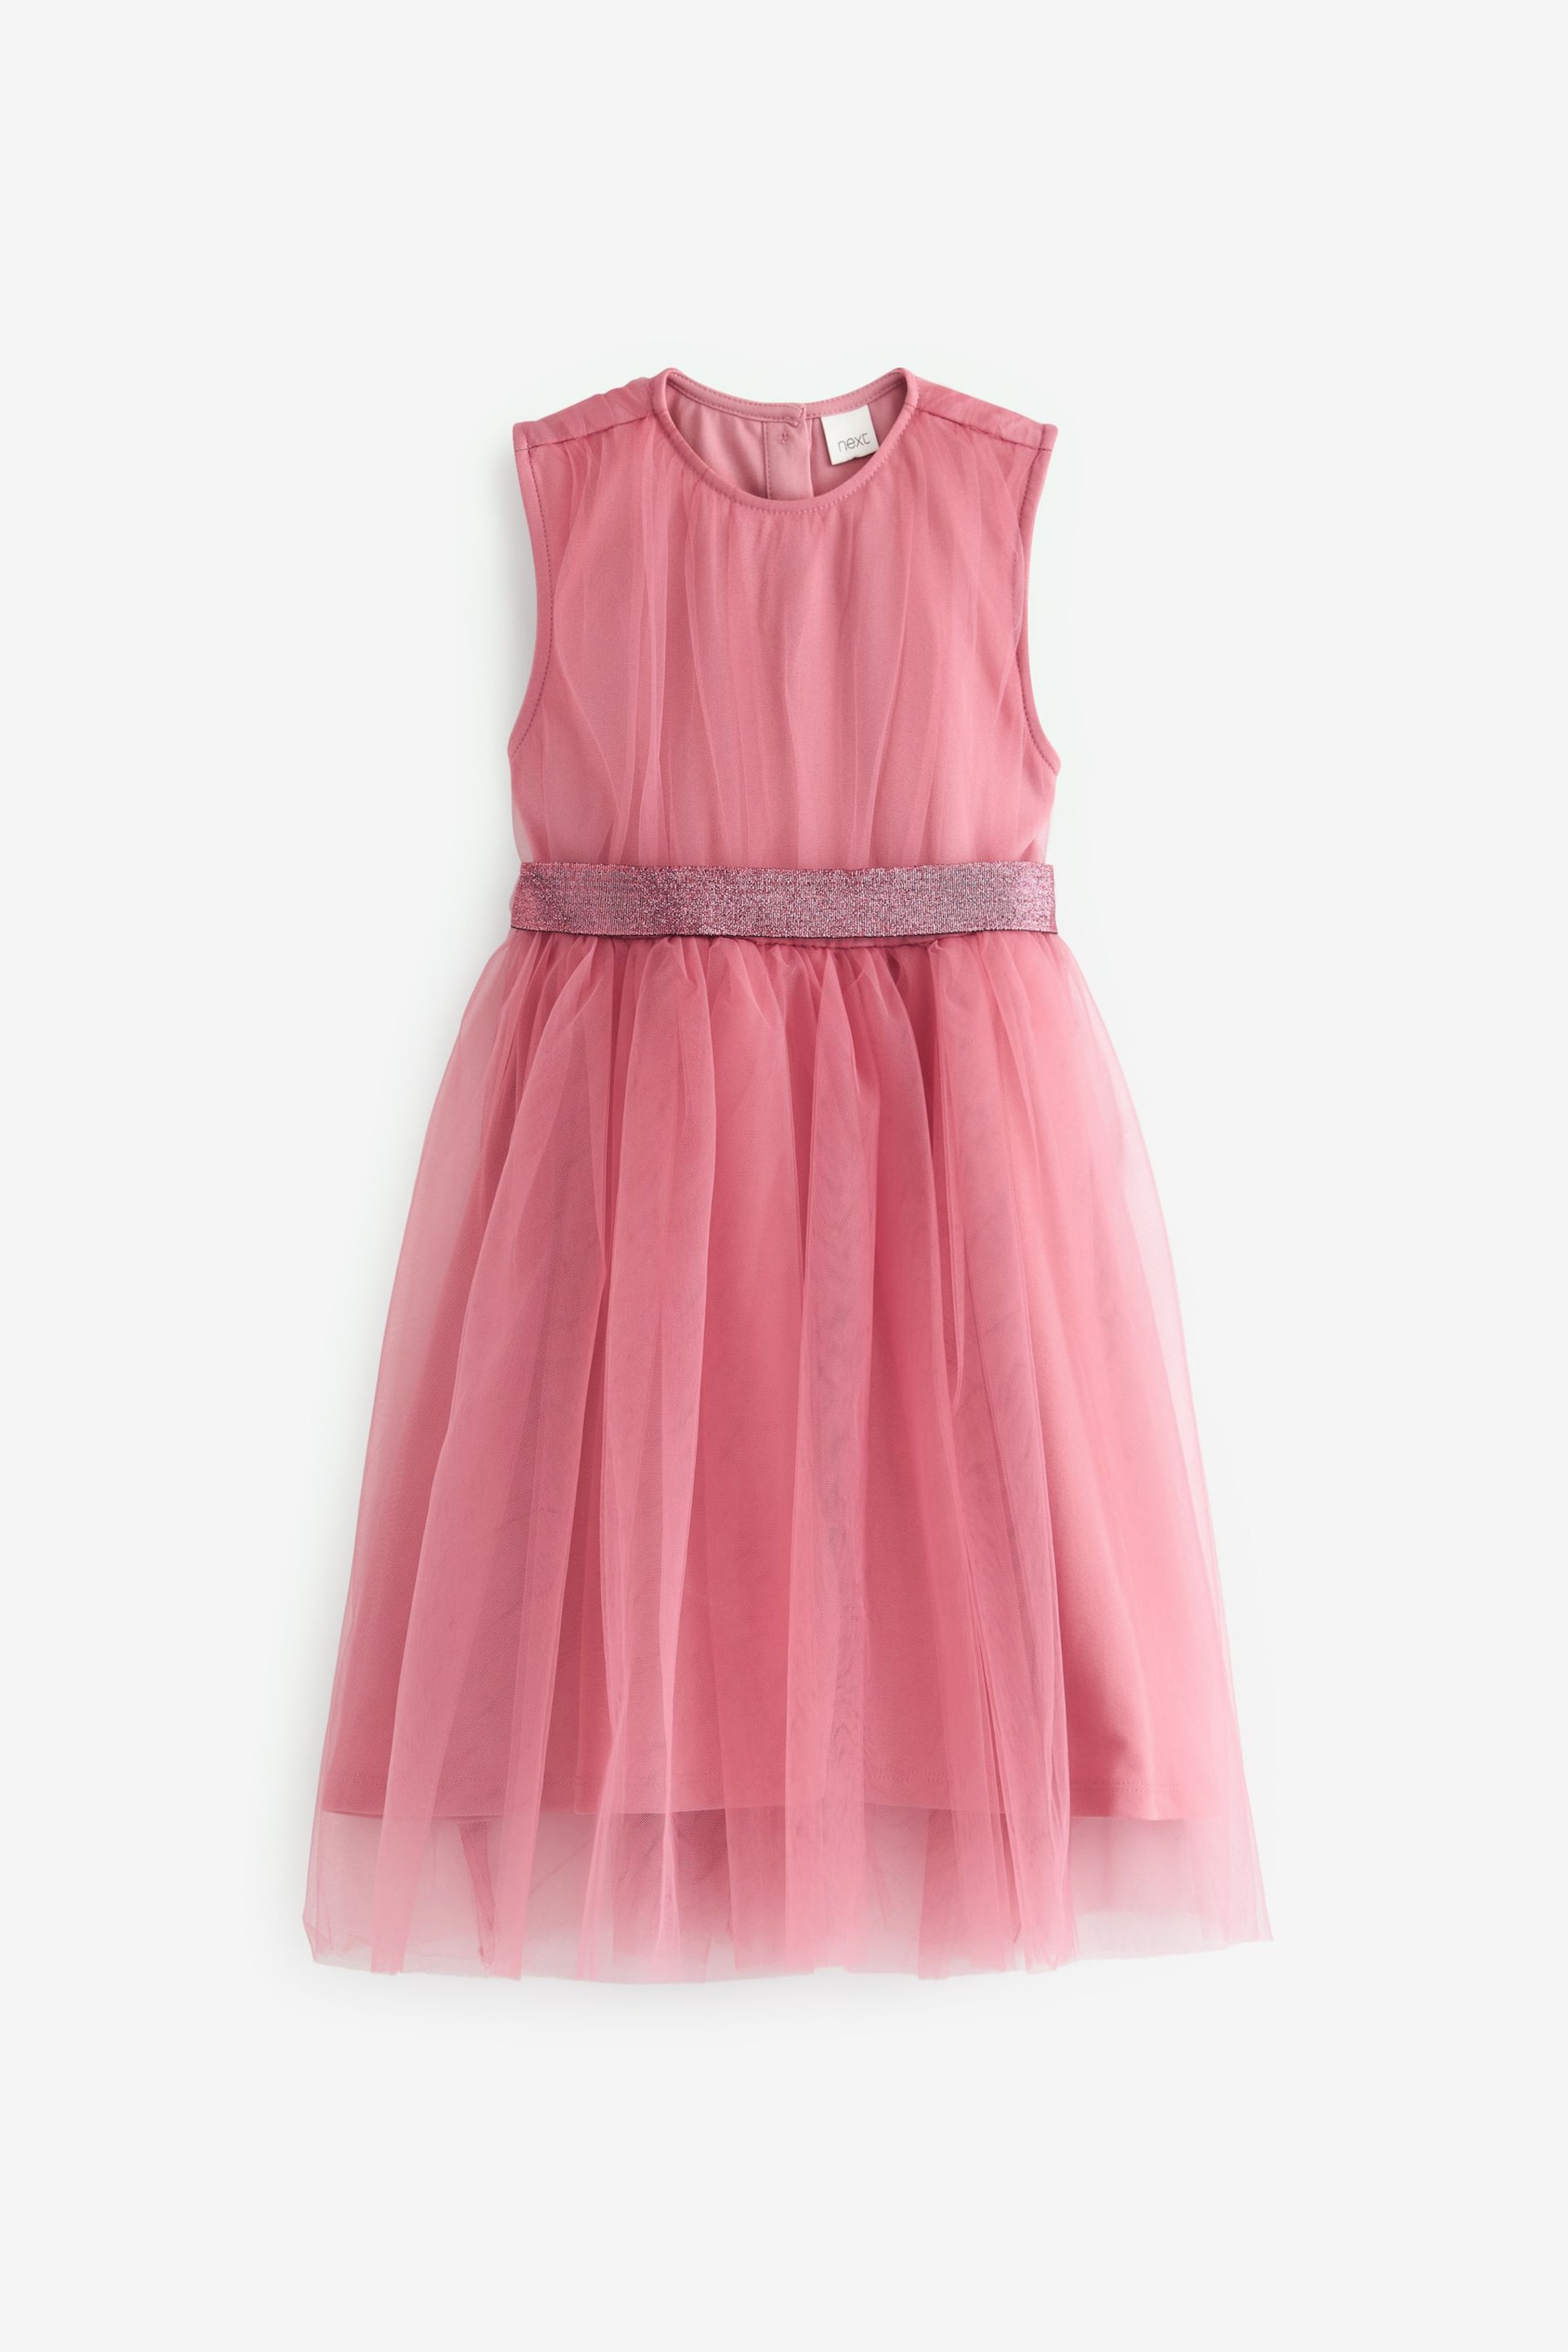 Rose Pink Mesh Tie Back Party Dress (3-16yrs) - Image 8 of 8